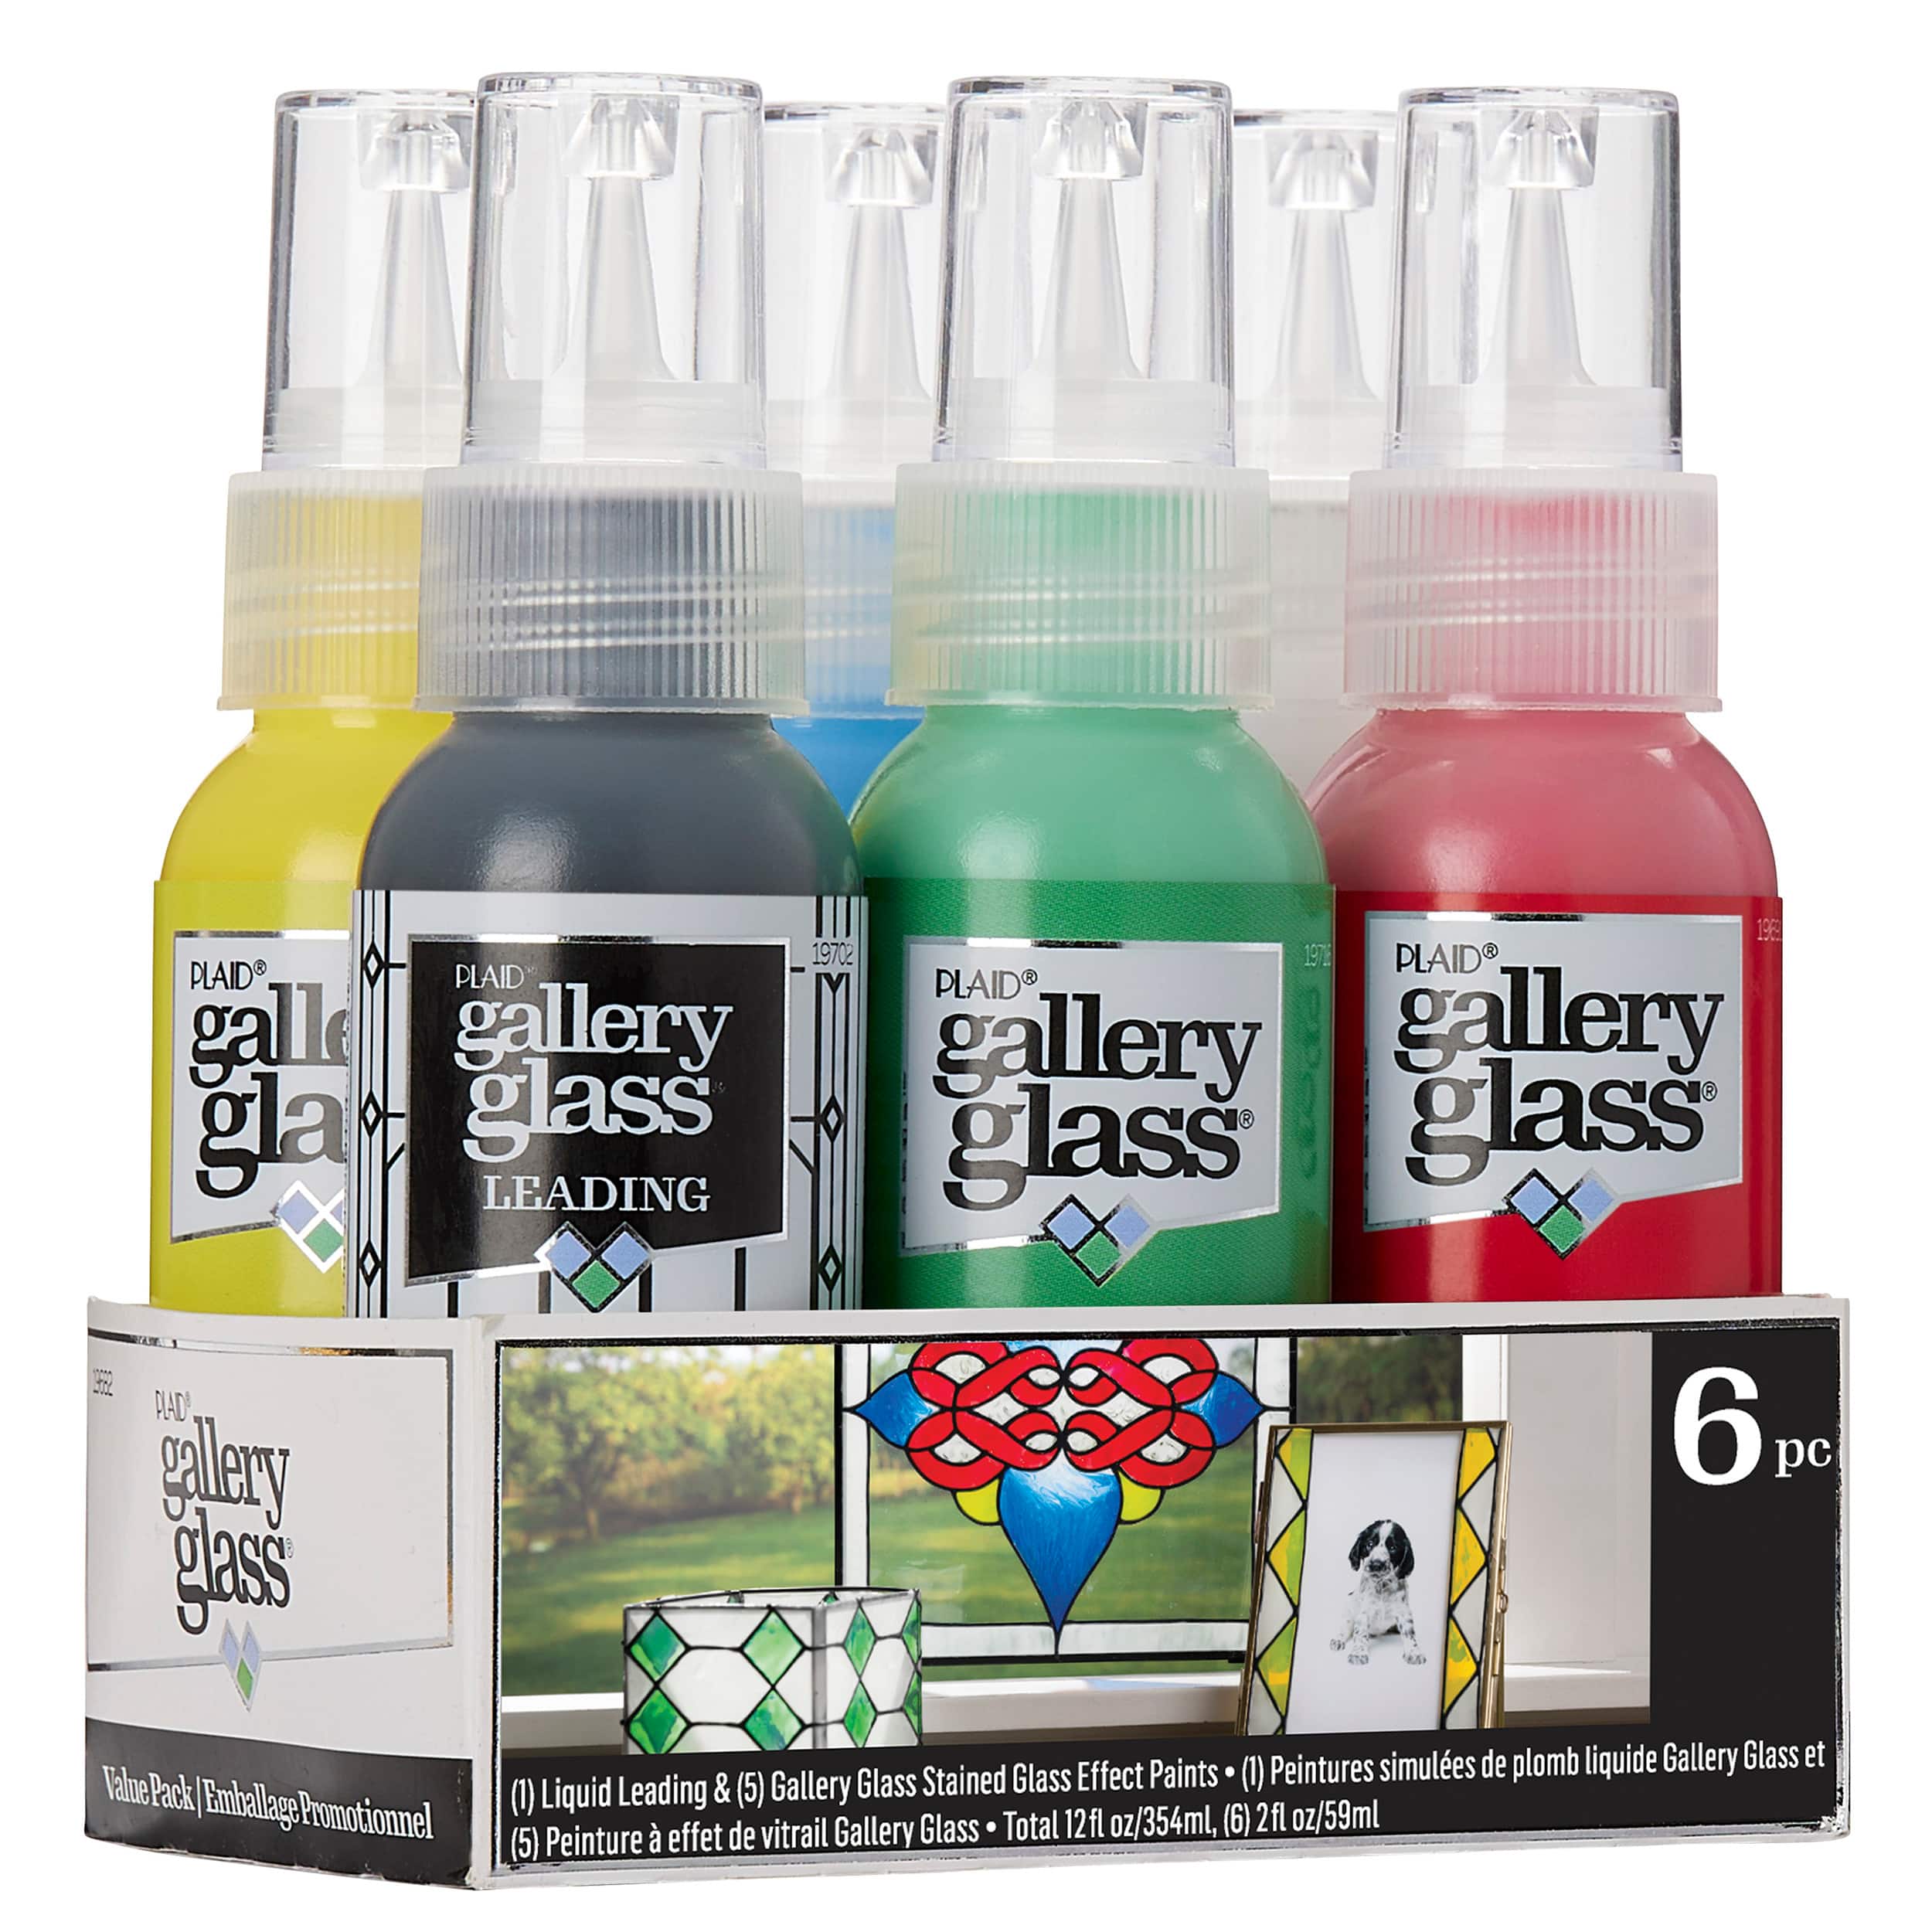 Plaid® Gallery Glass® Value Pack